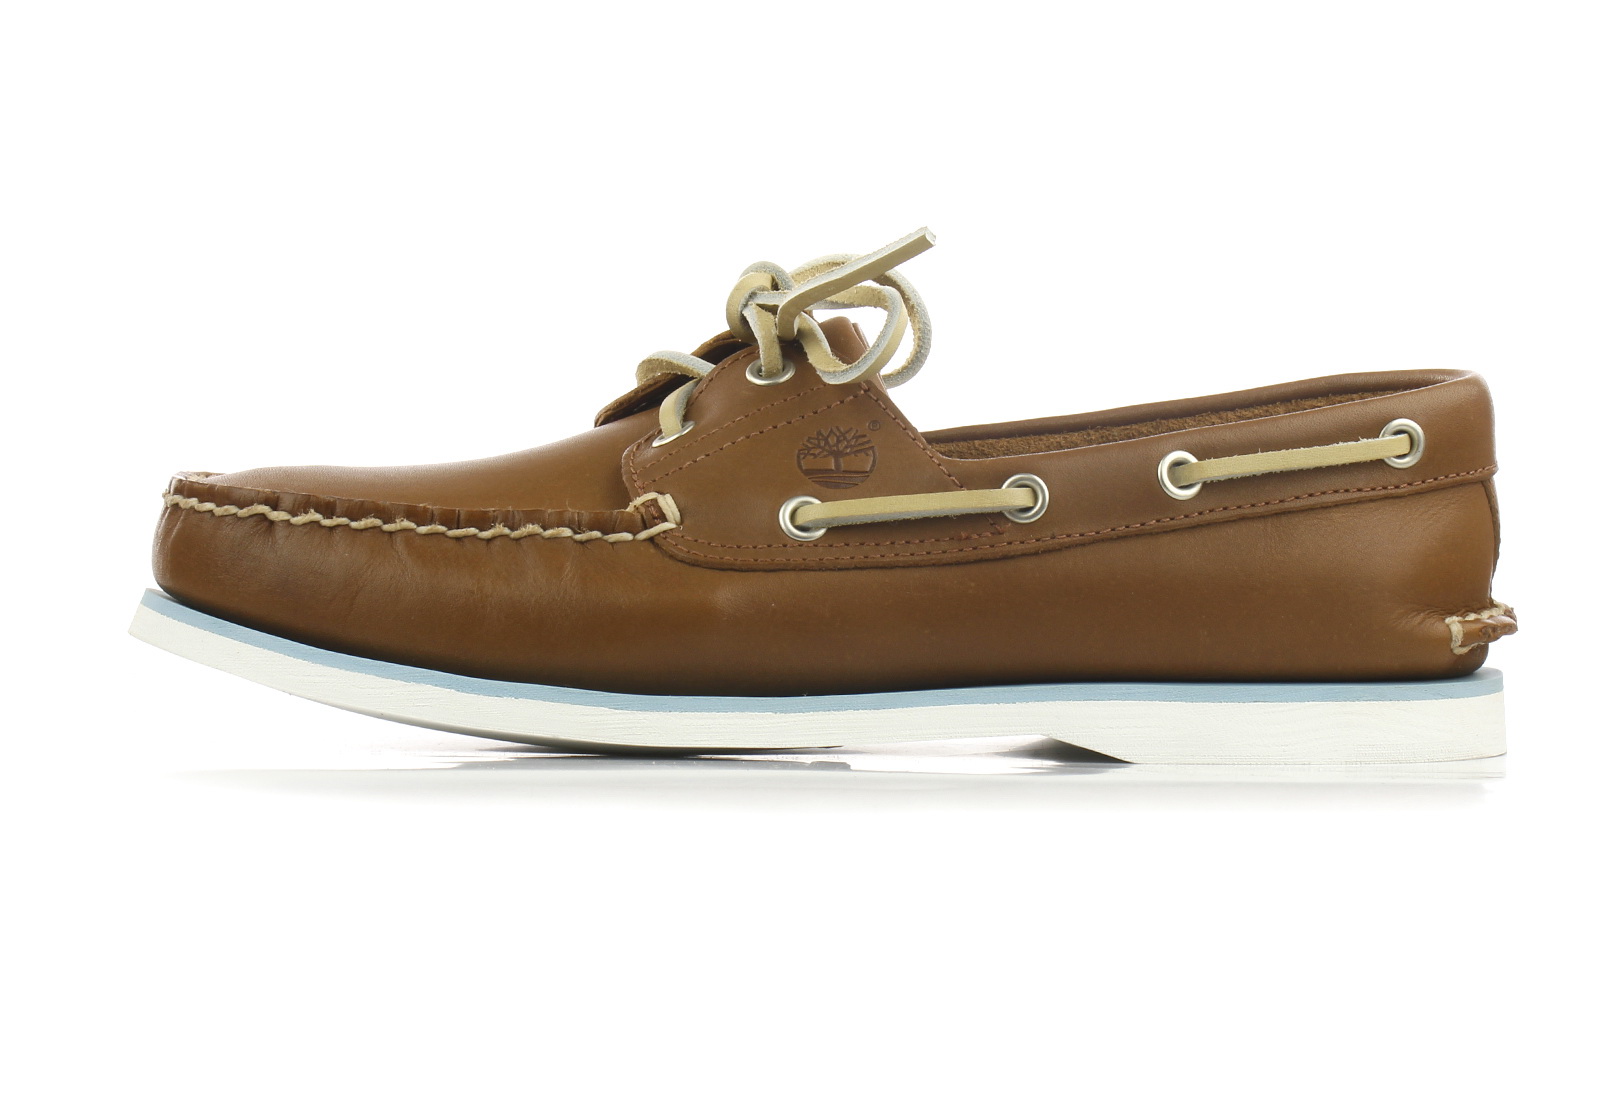 Timberland Topánky Classic Boat